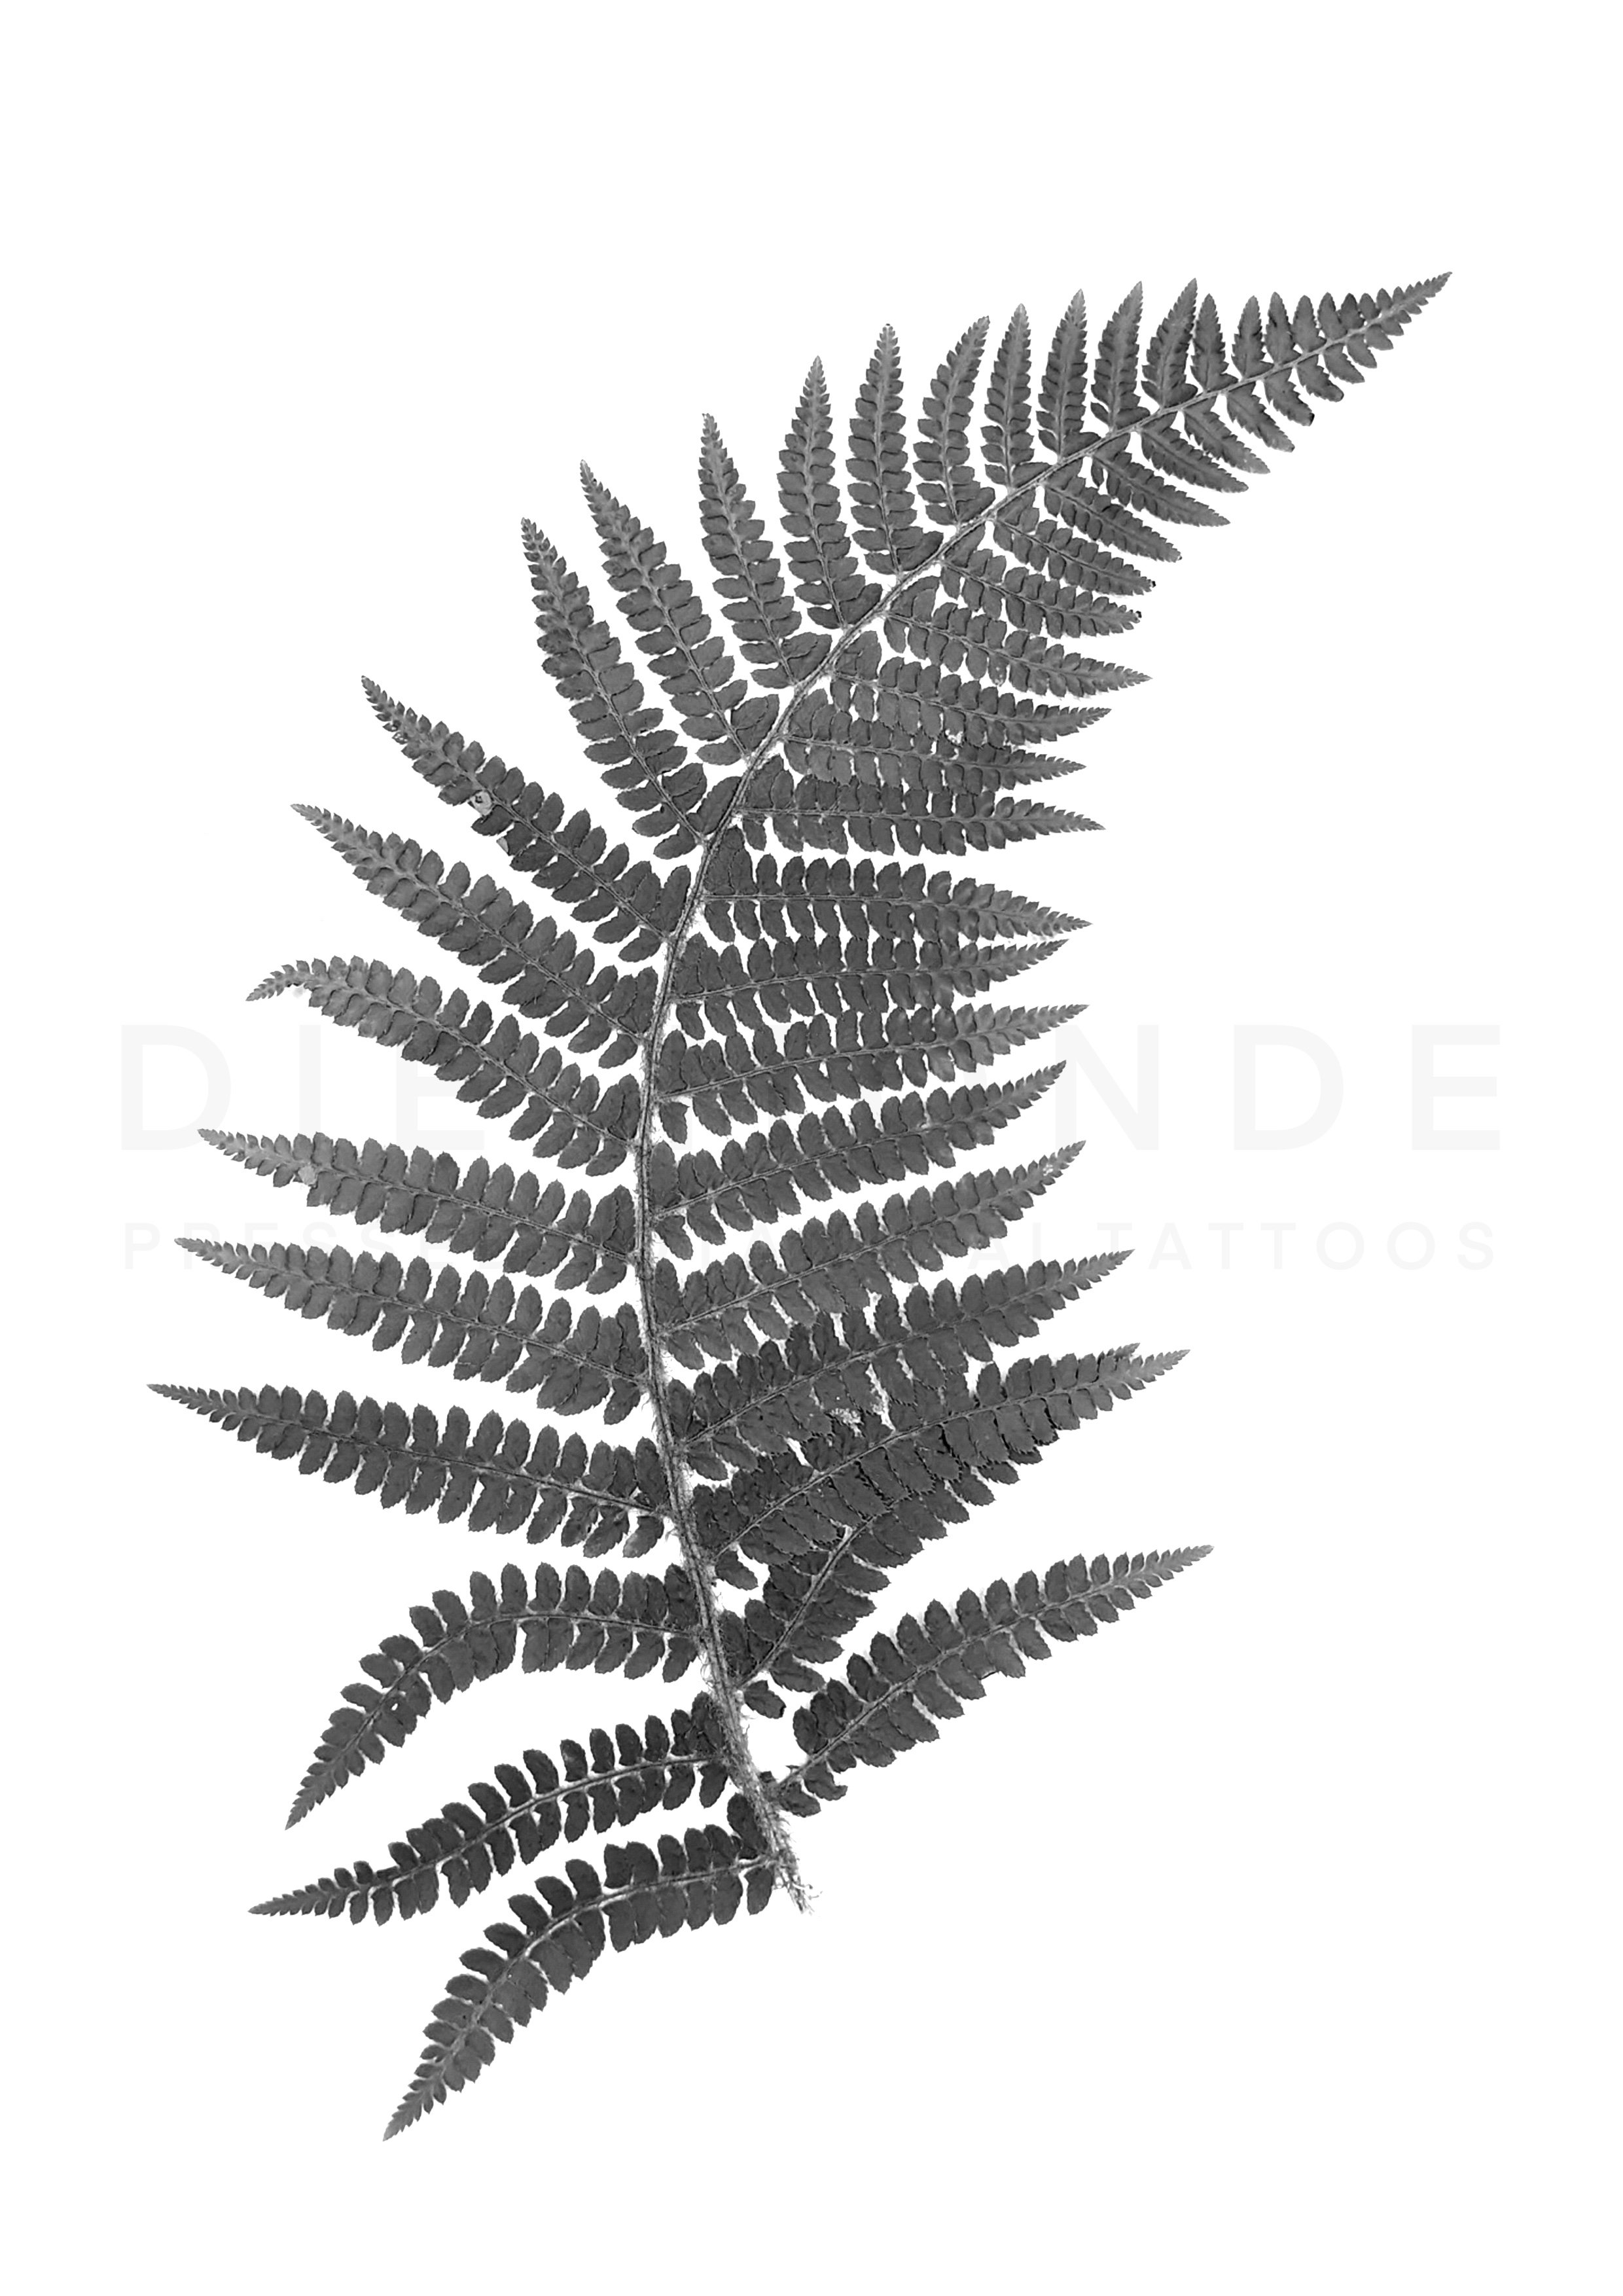 Flash no. 34, Fern, £500, Size: 30cm (length), Estimated time: 6 hours (day sitting)